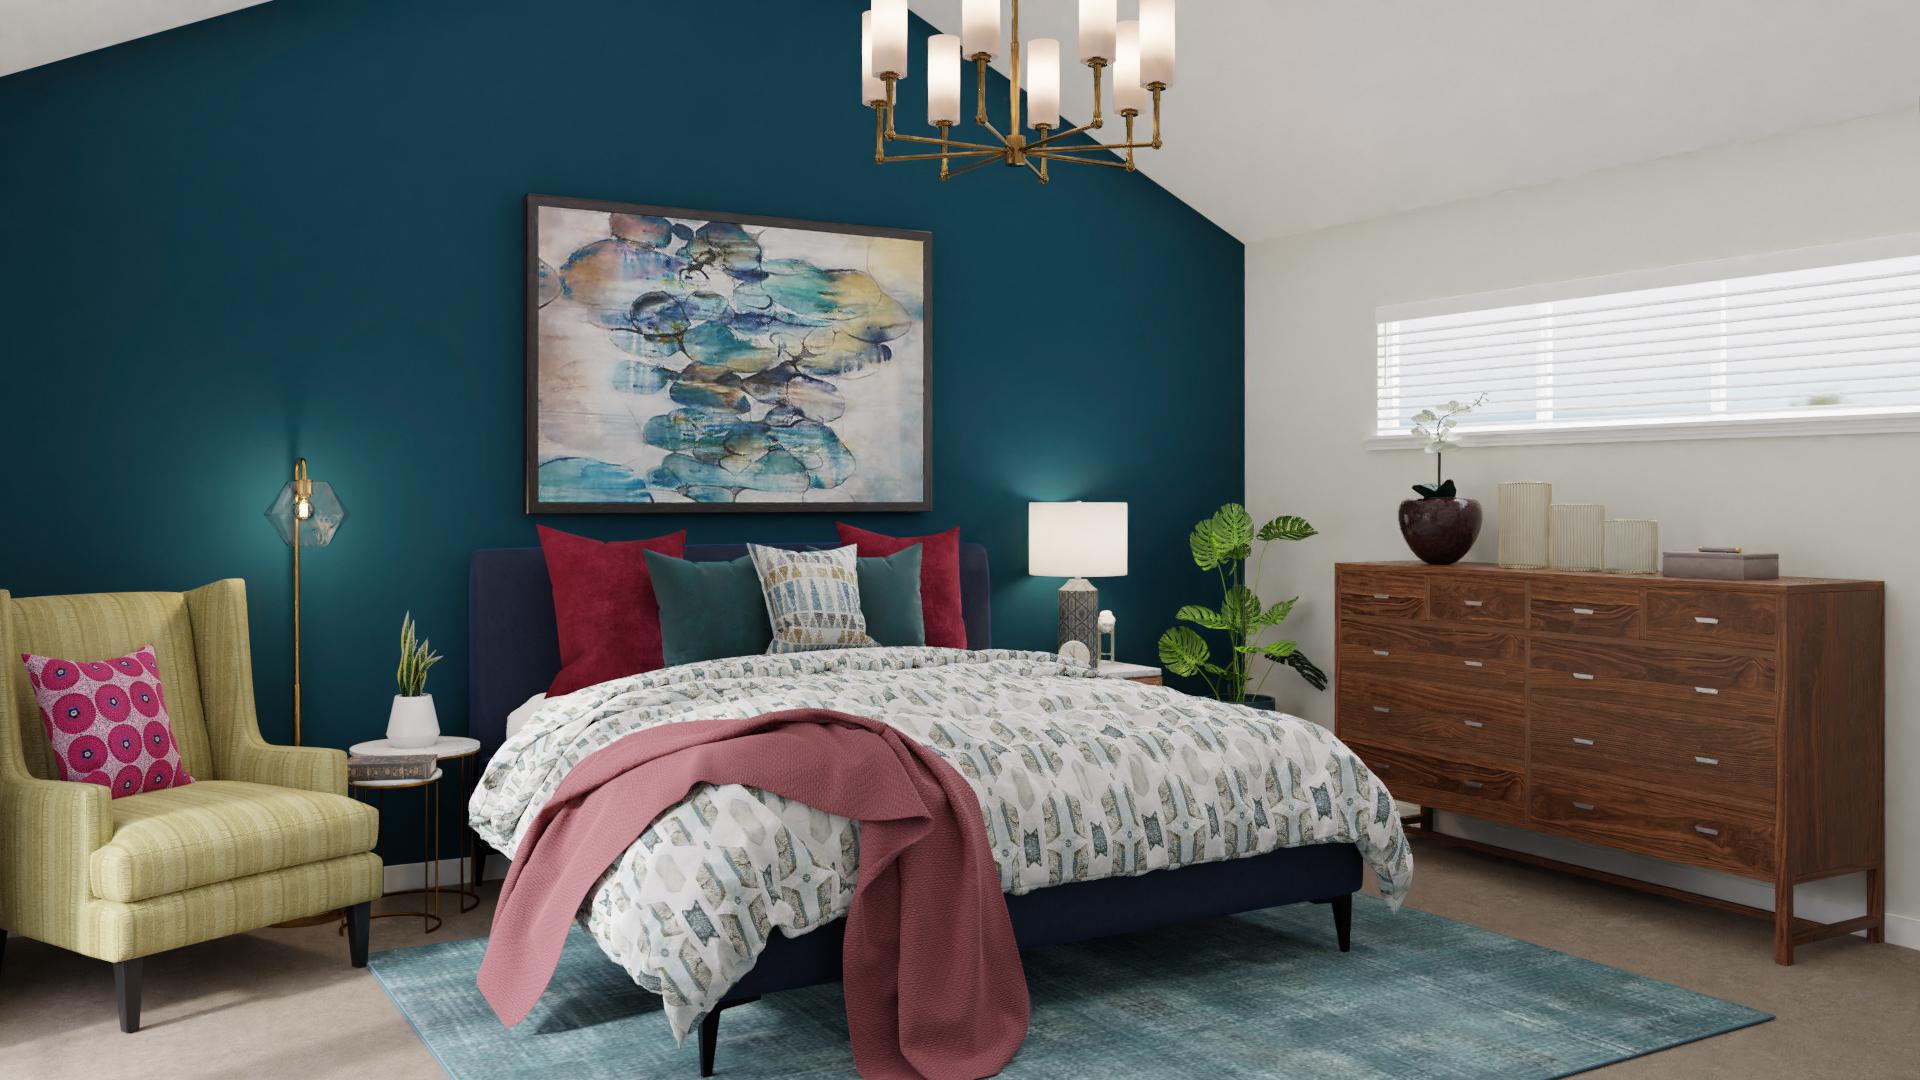 A Contemporary Bedroom Doused In Jewel Tones